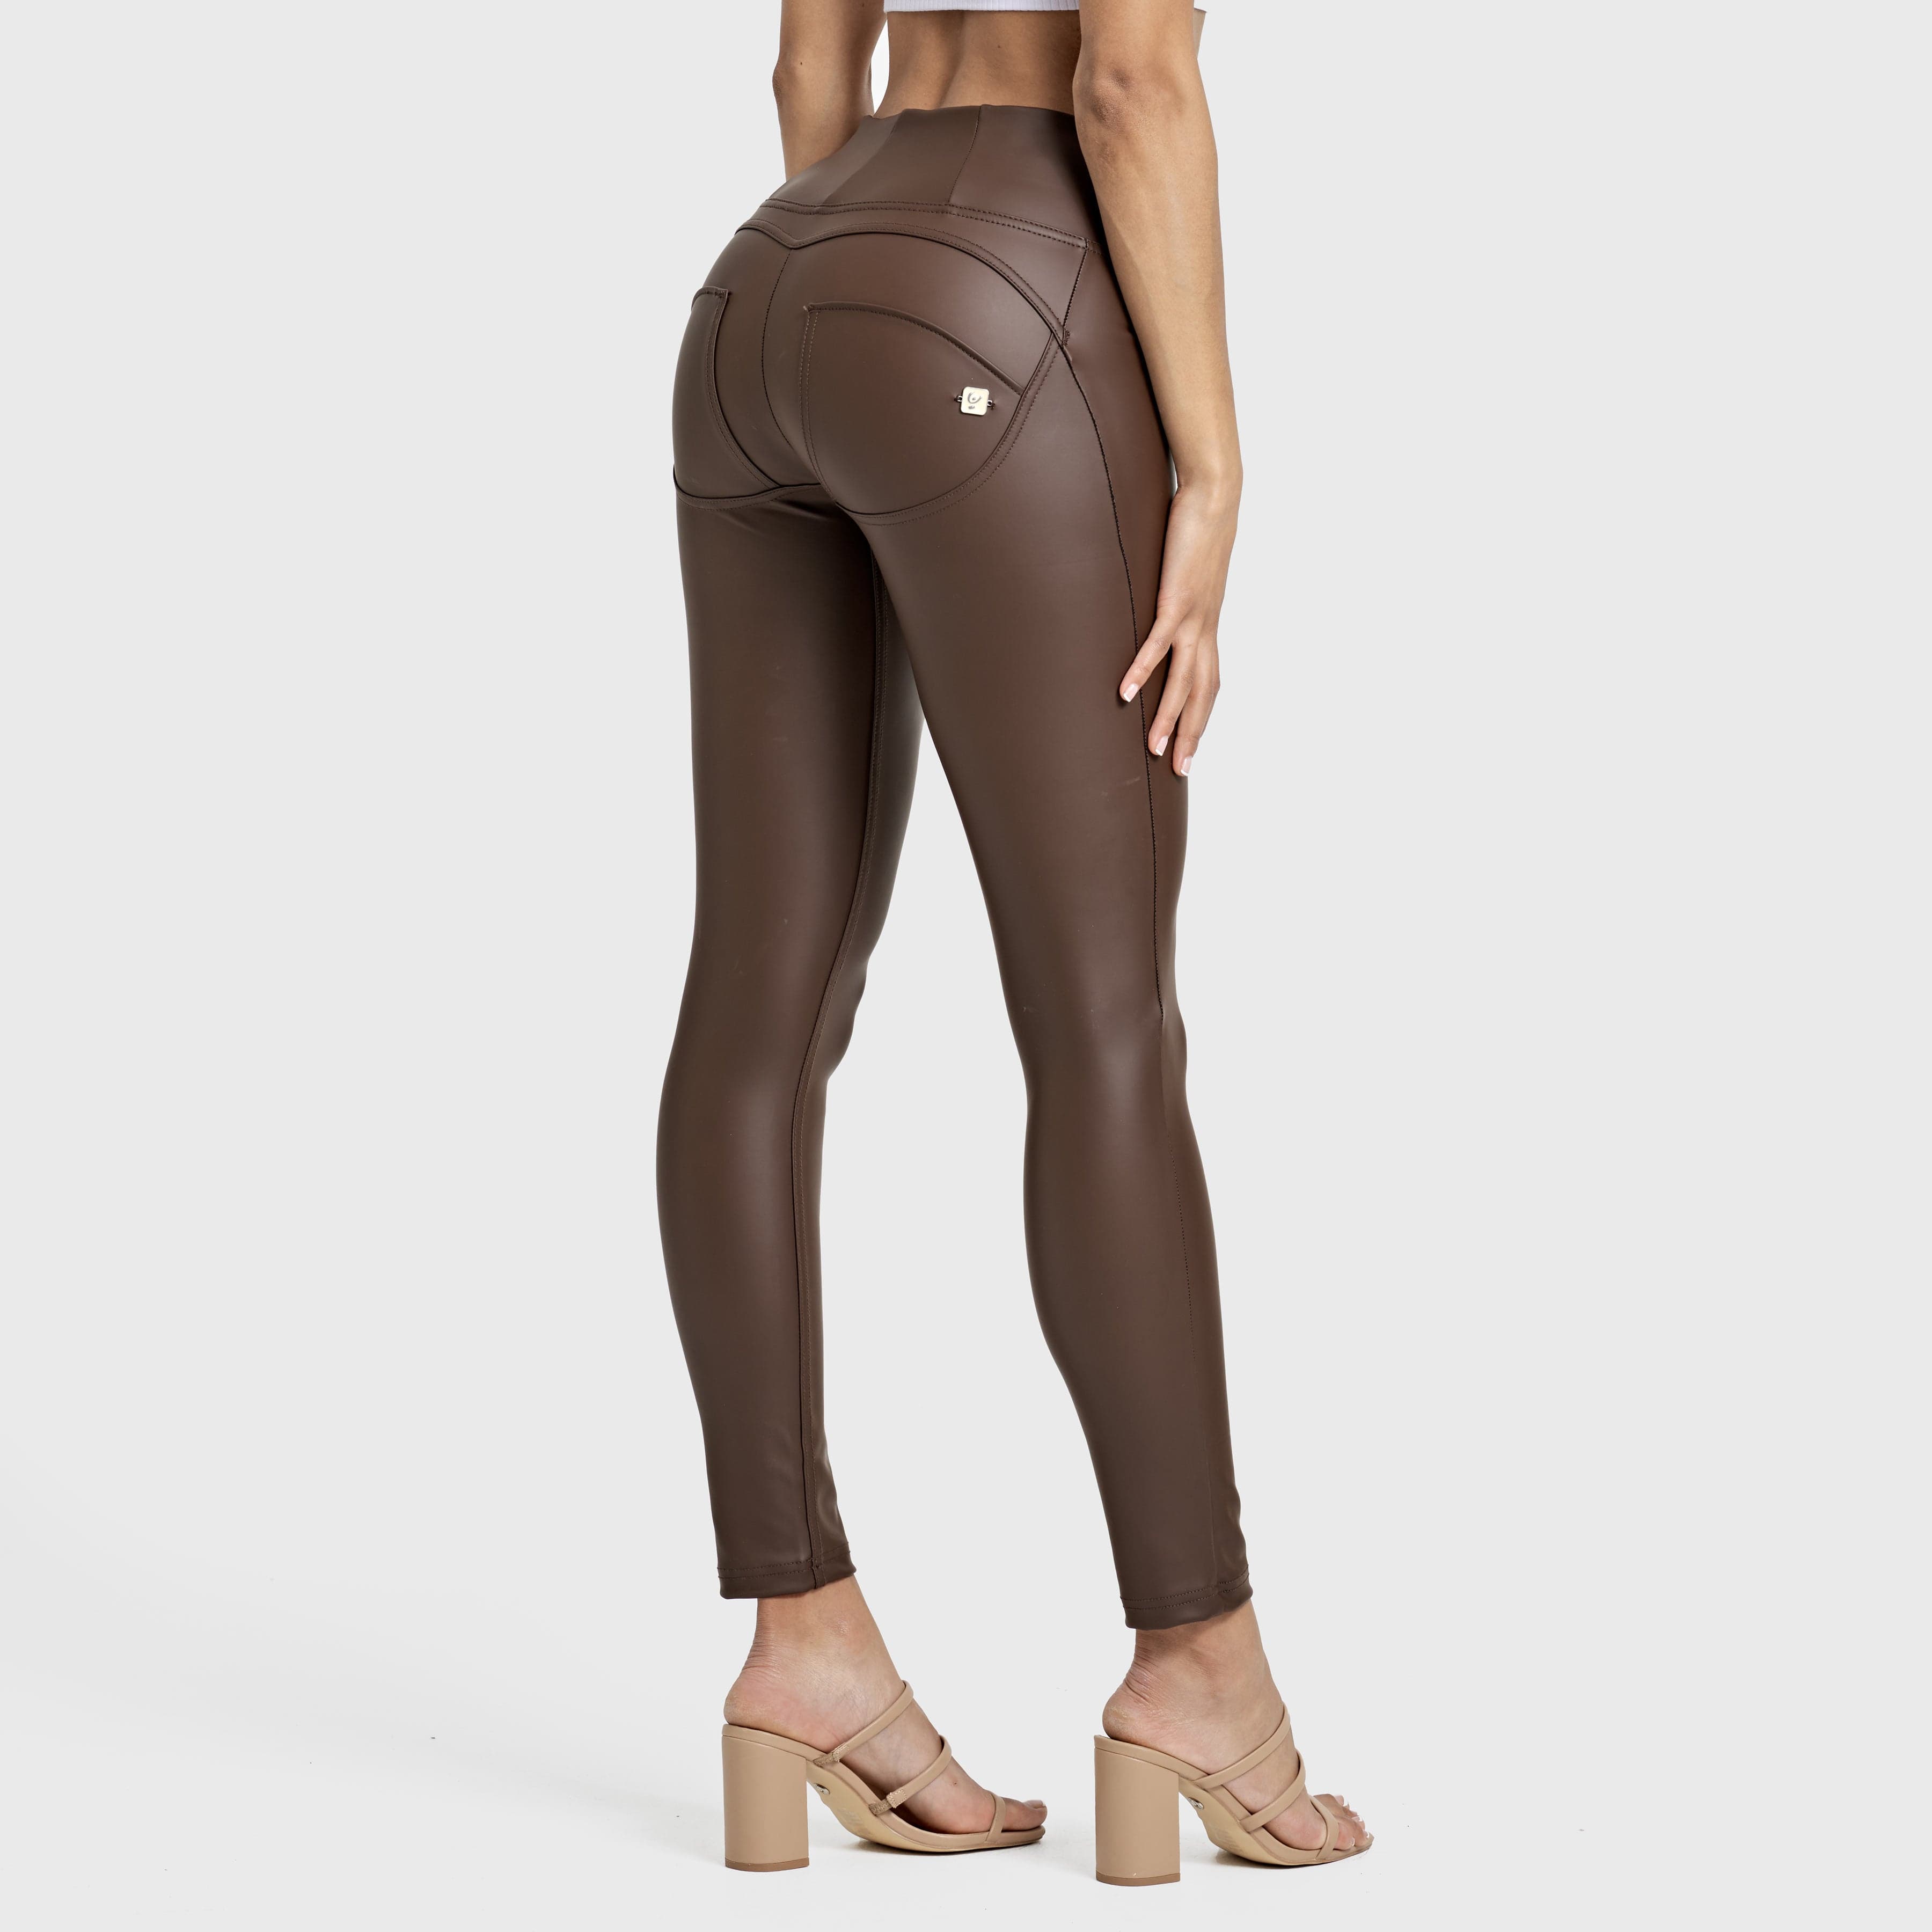 WR.UP® Faux Leather - High Waisted - Full Length - Chocolate 1